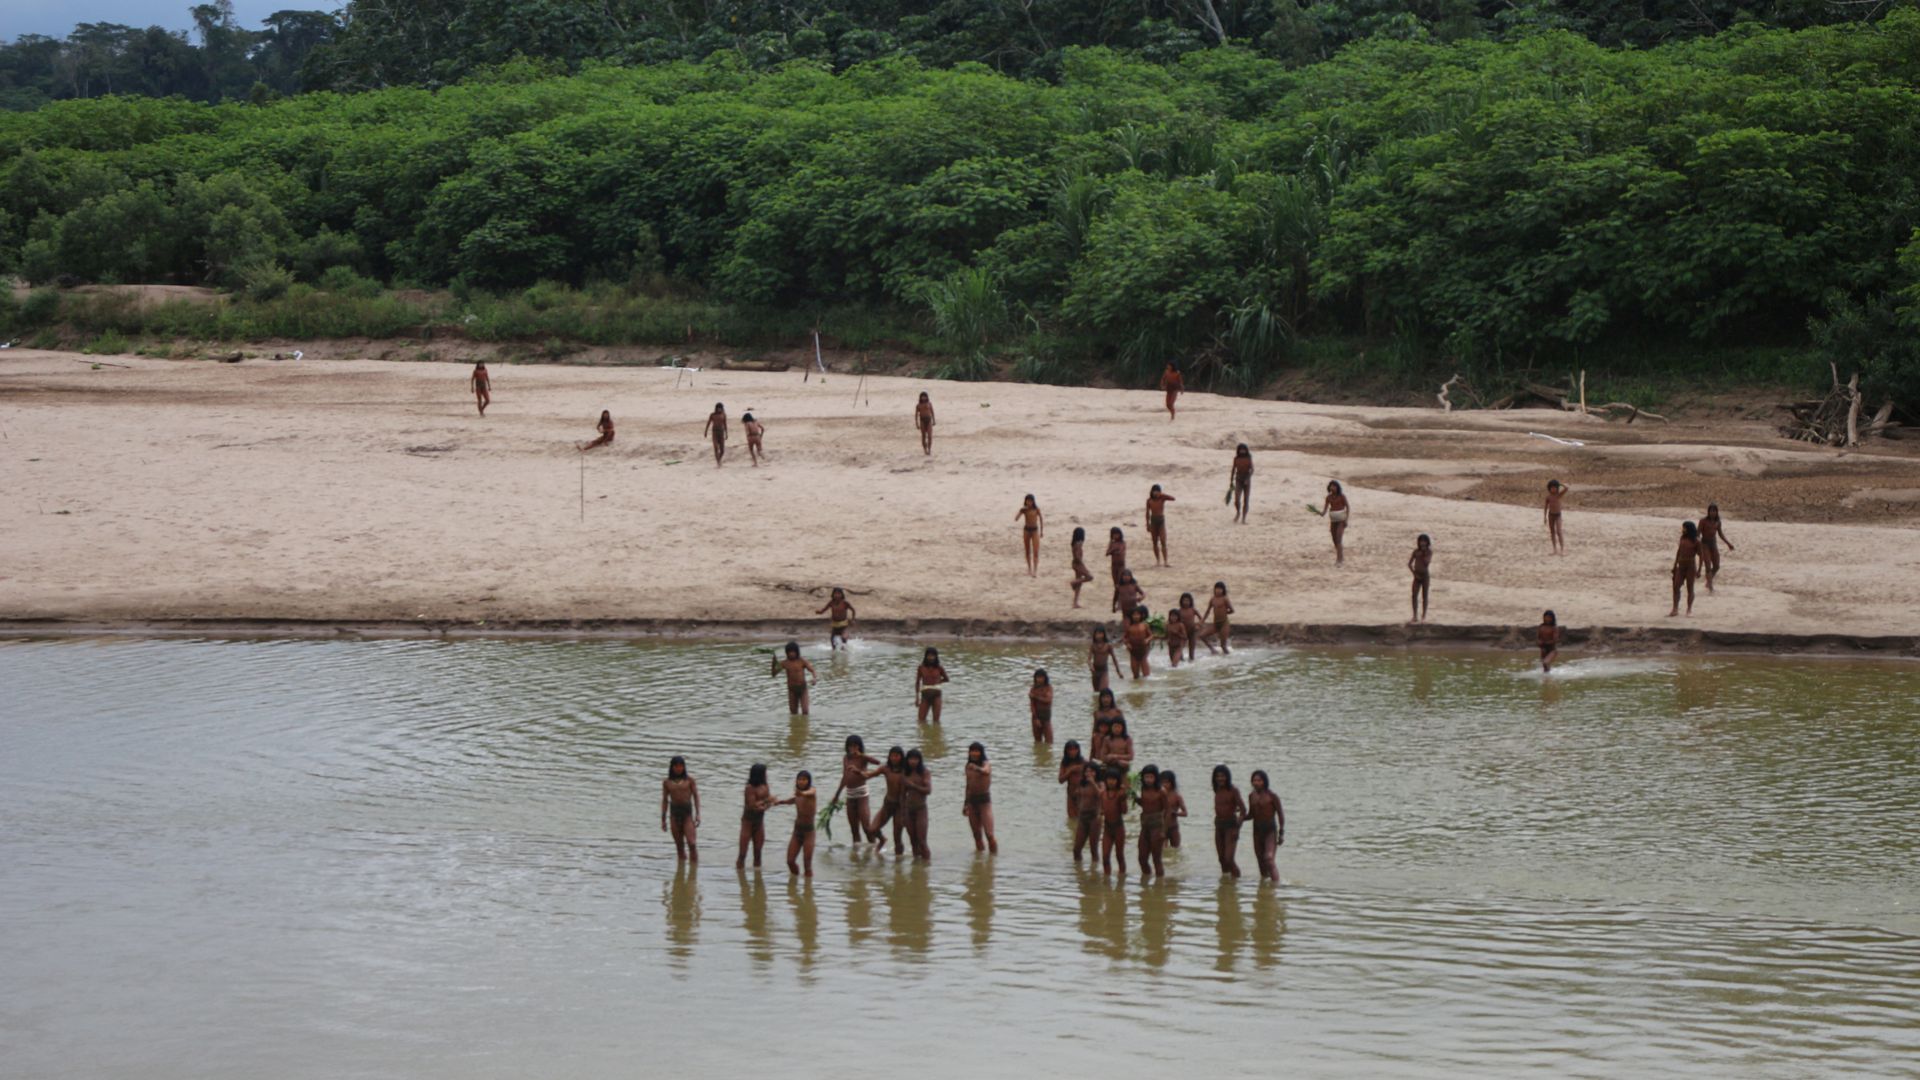 'Disaster': Rare photos of uncontacted tribe show it leaving rainforest to look for food